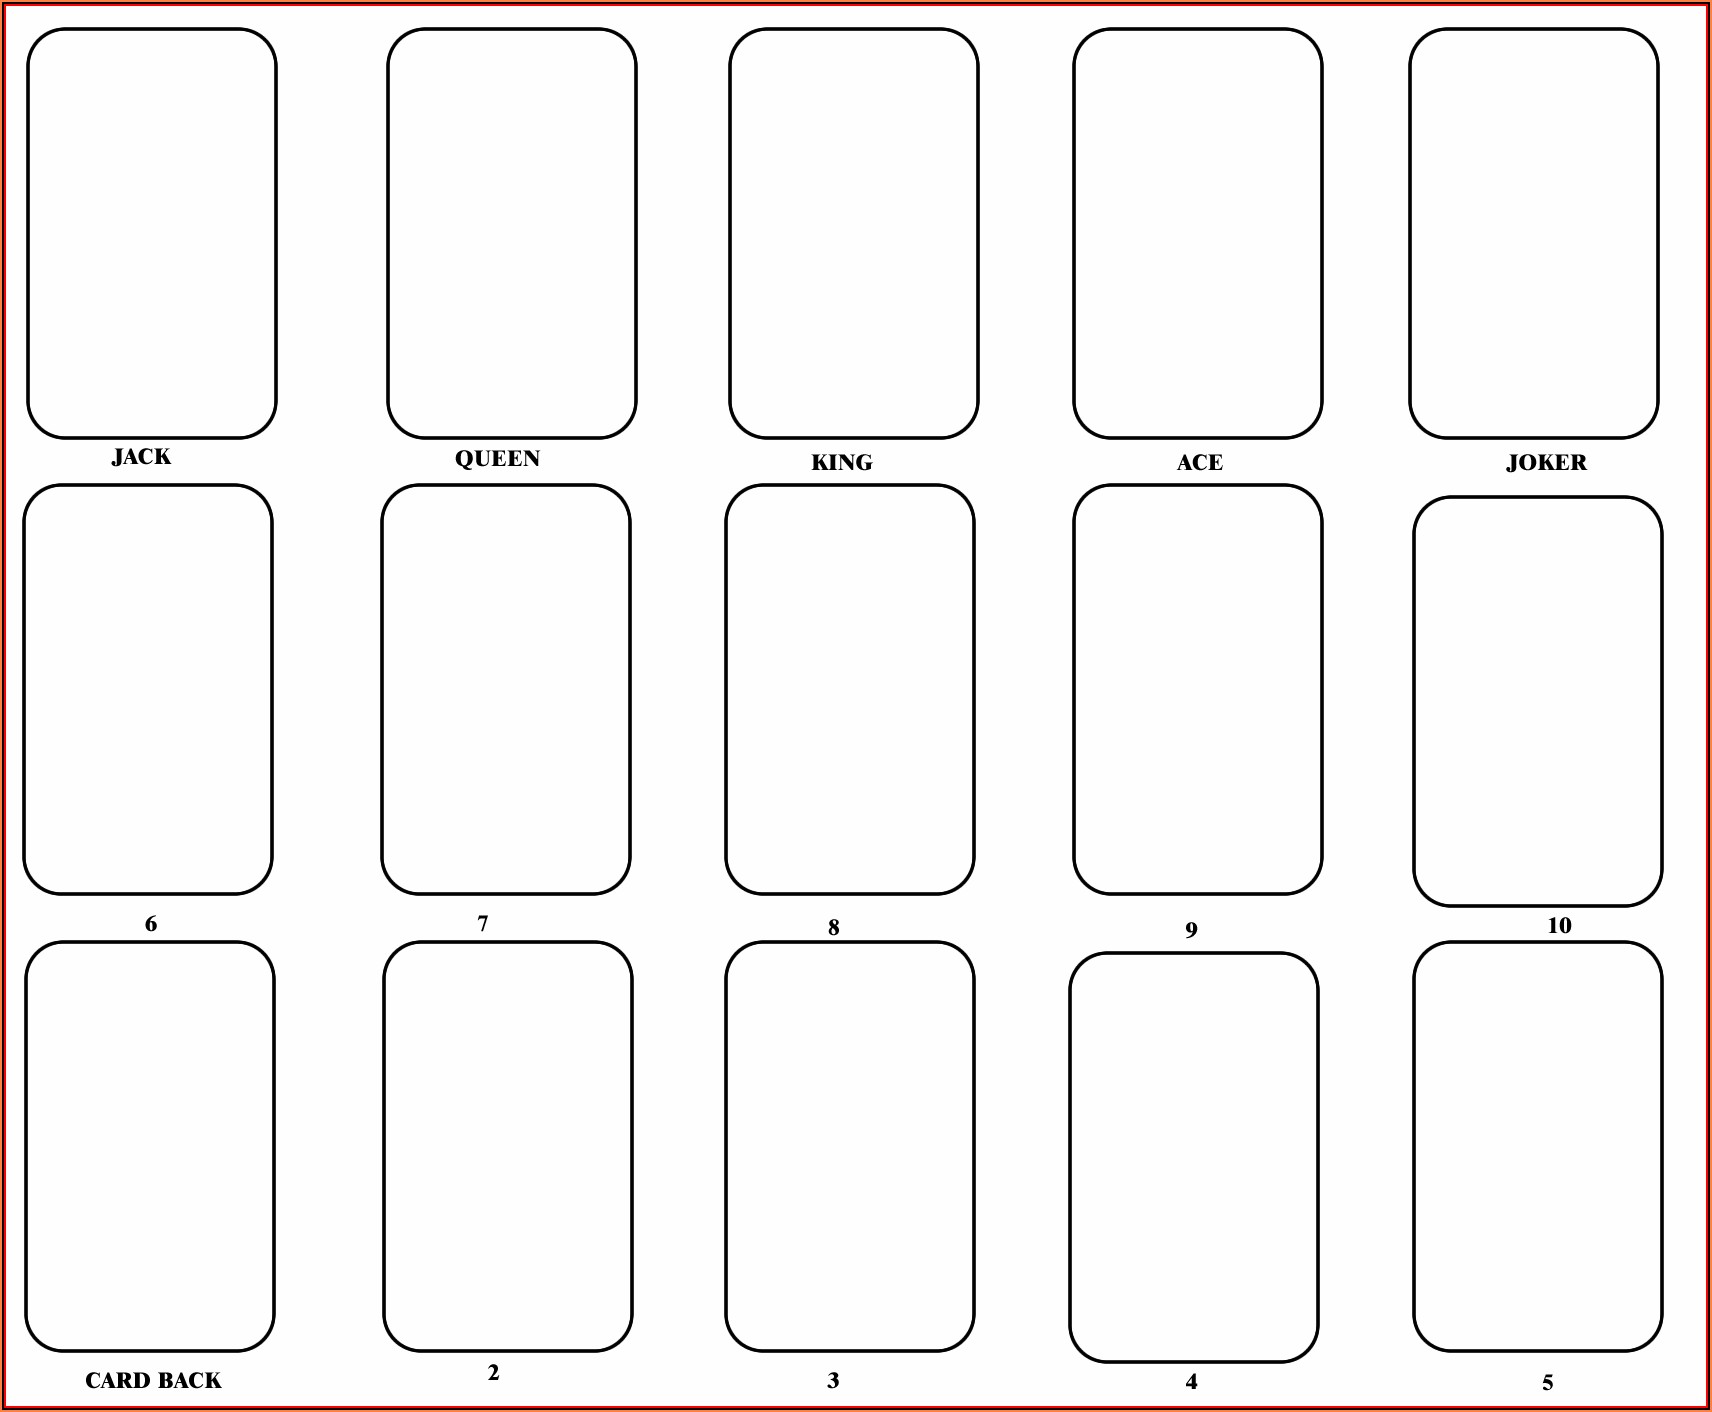 Blank Flash Card Template Template 1 : Resume Examples #e79QQx79kQ